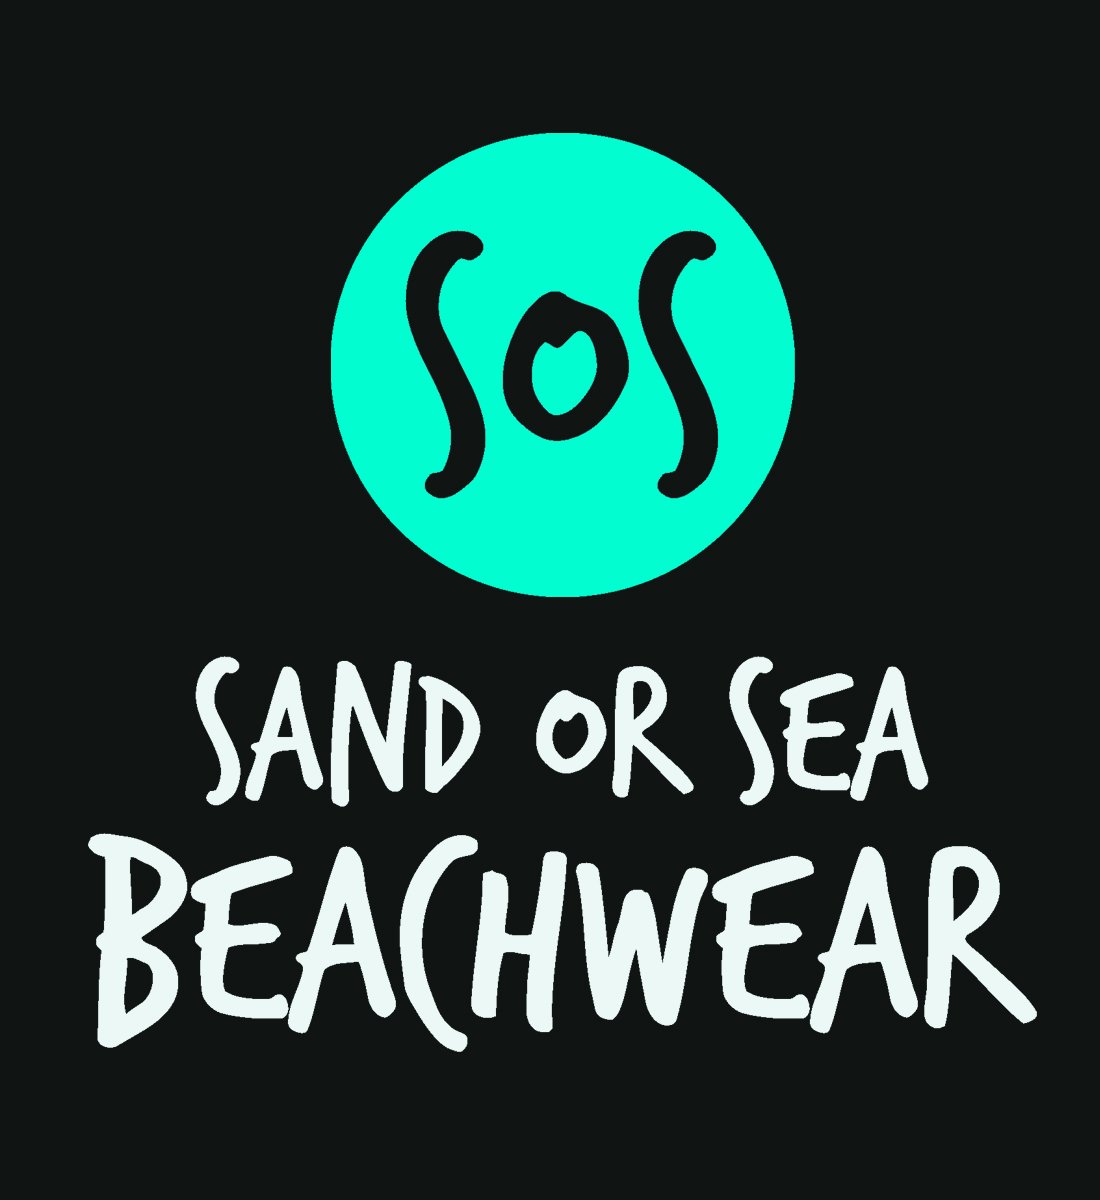 Welcome to SOS Beachwear! We offer Handmade Crochet Beachwear from Bikini's to Sandals with a Bohemian Flare. Shop Now on Etsy & Facebook.